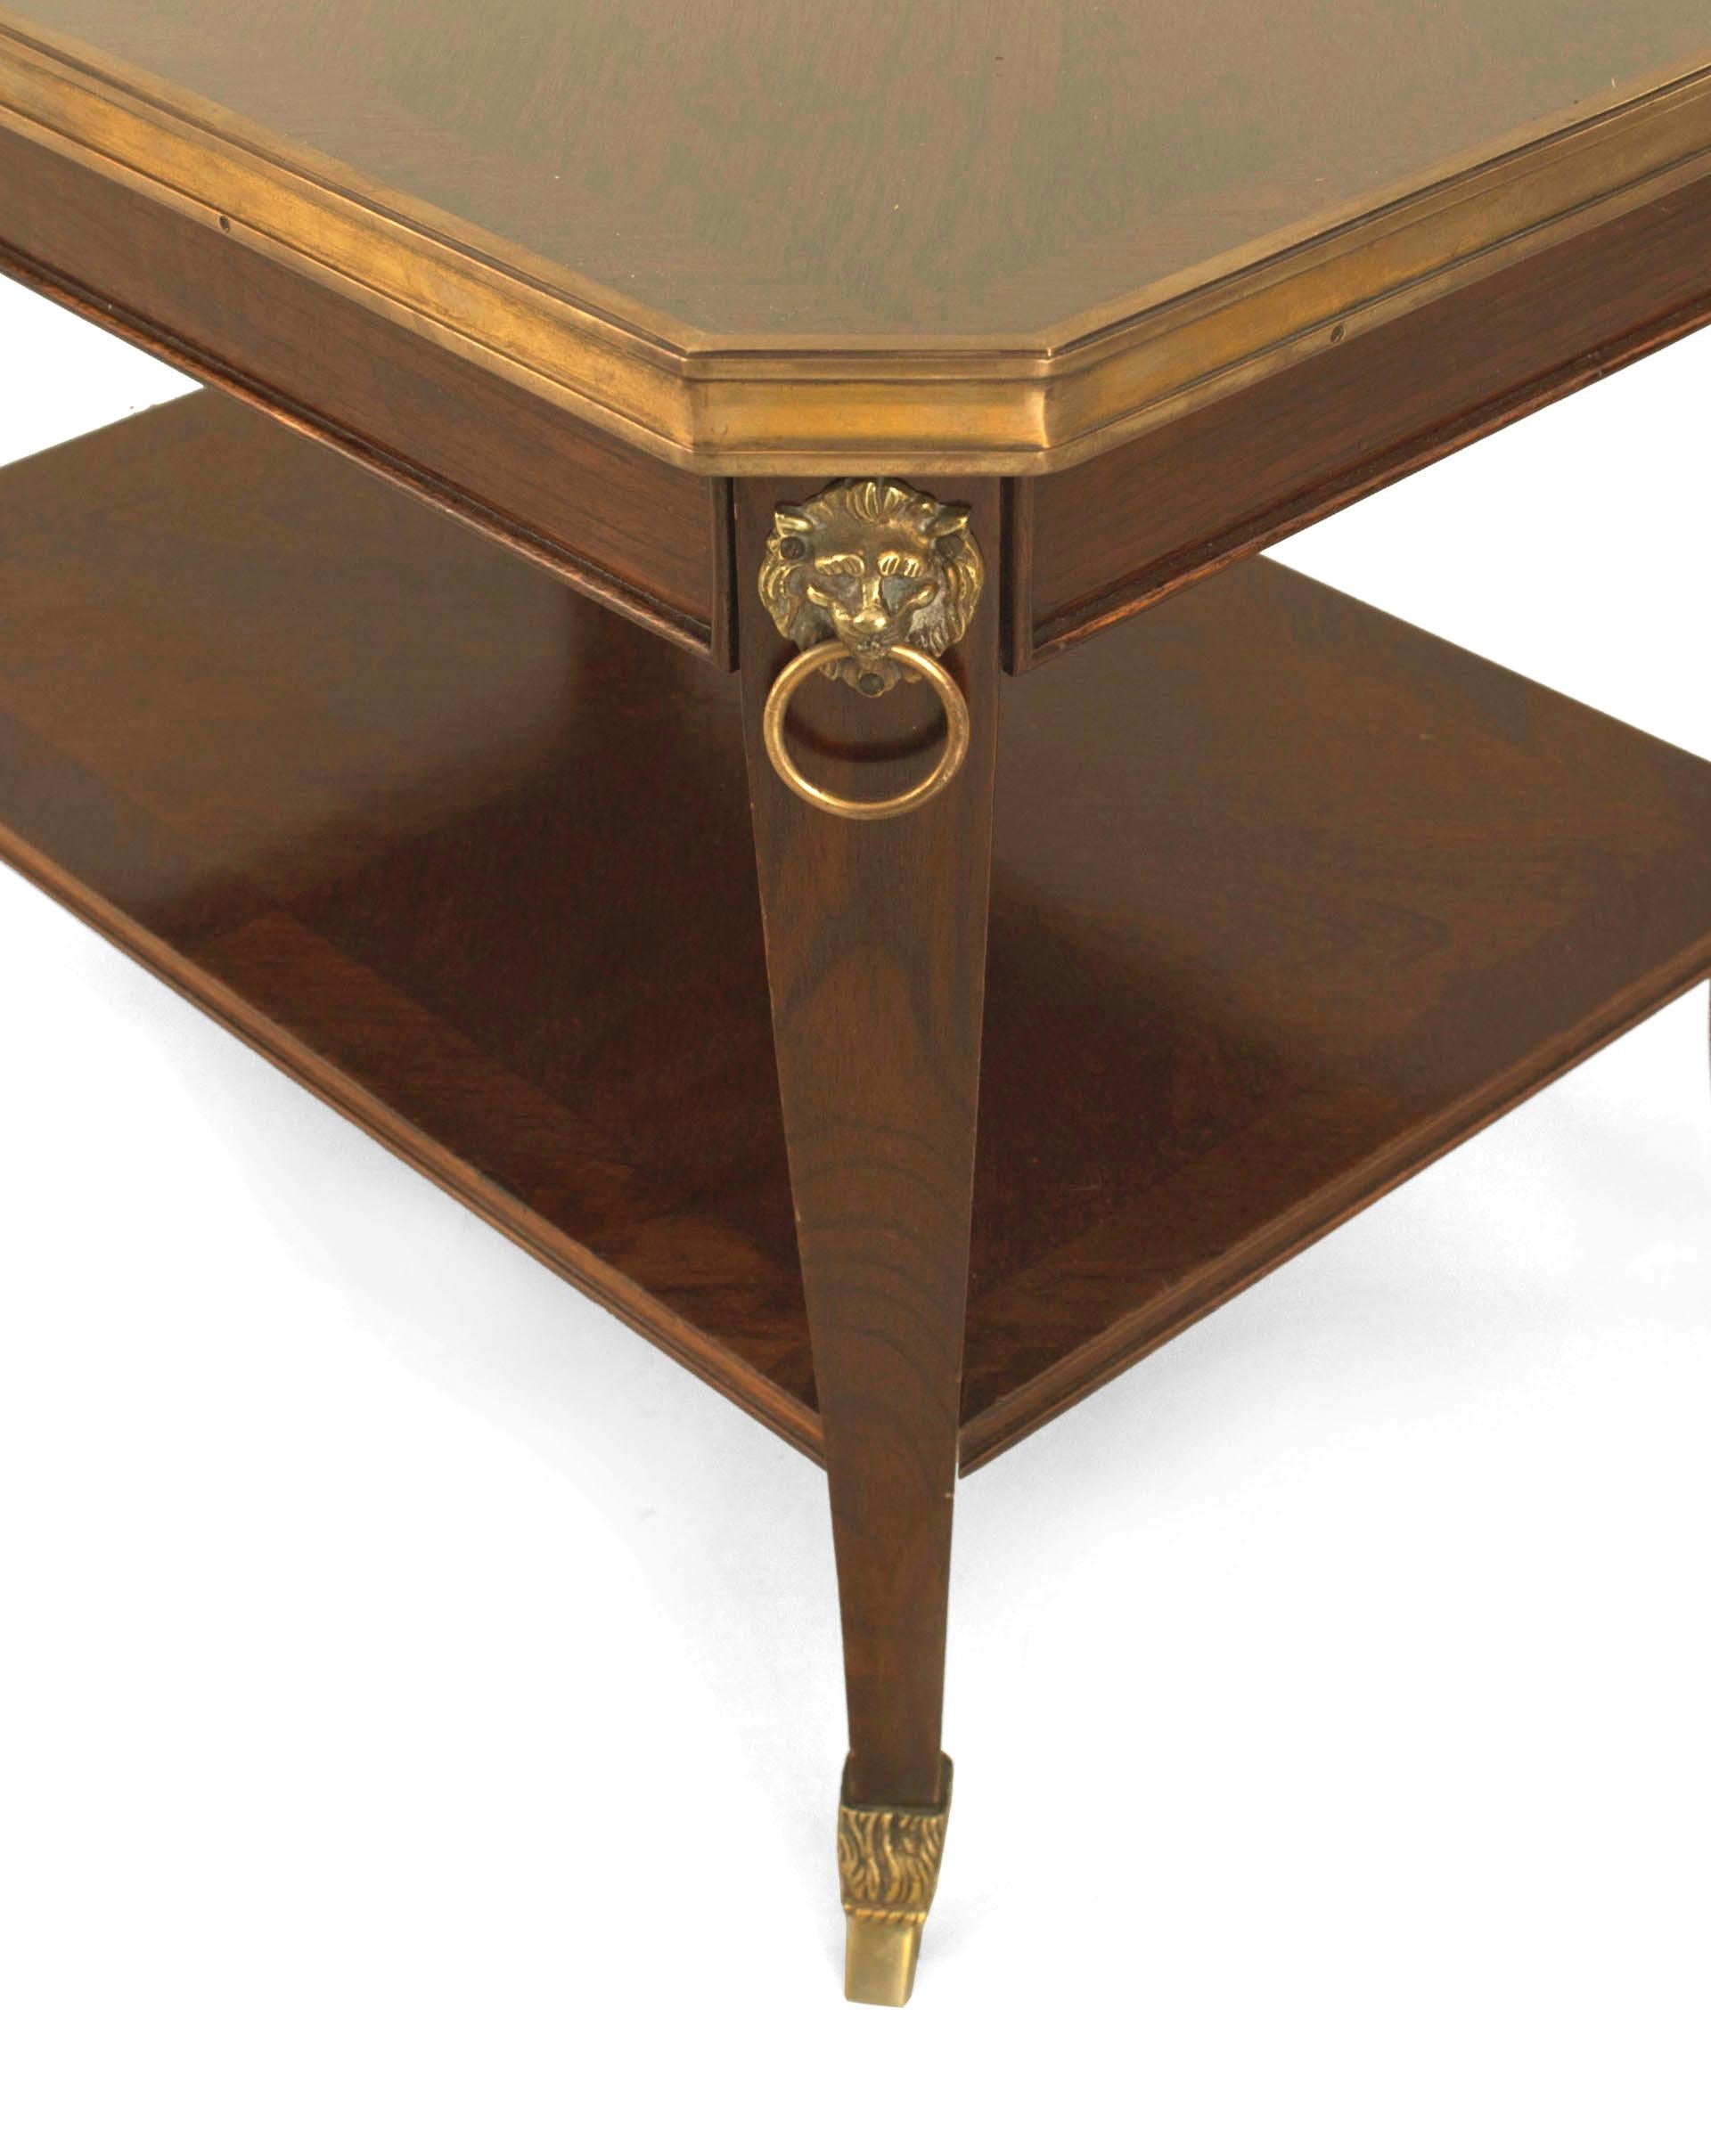 French 1940s (Regency style) mahogany coffee table with a shelf and bronze lion head trim, hoof feet, and an edge supporting an inset glass top (stamped: JANSEN).

Maison Jansen was a Paris-based interior decoration office founded in 1880